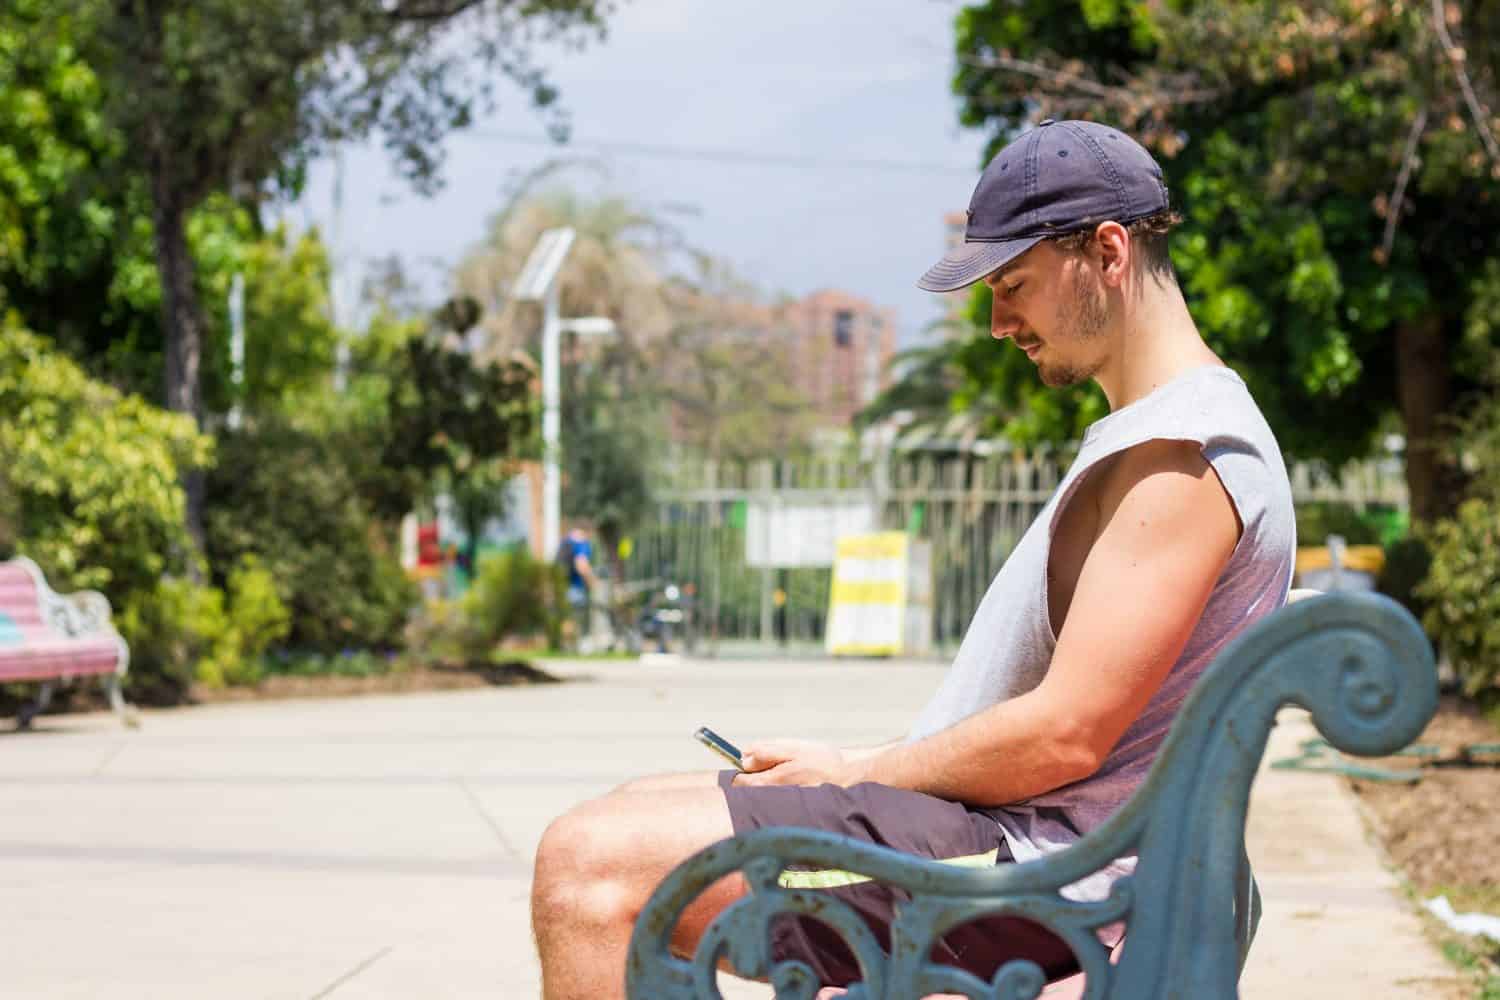 Young man with cap looking at cellphone sitting on park bench on sunny day. Millenial boy on sleeveless shirt and shorts using smart phone outdoors in summer time